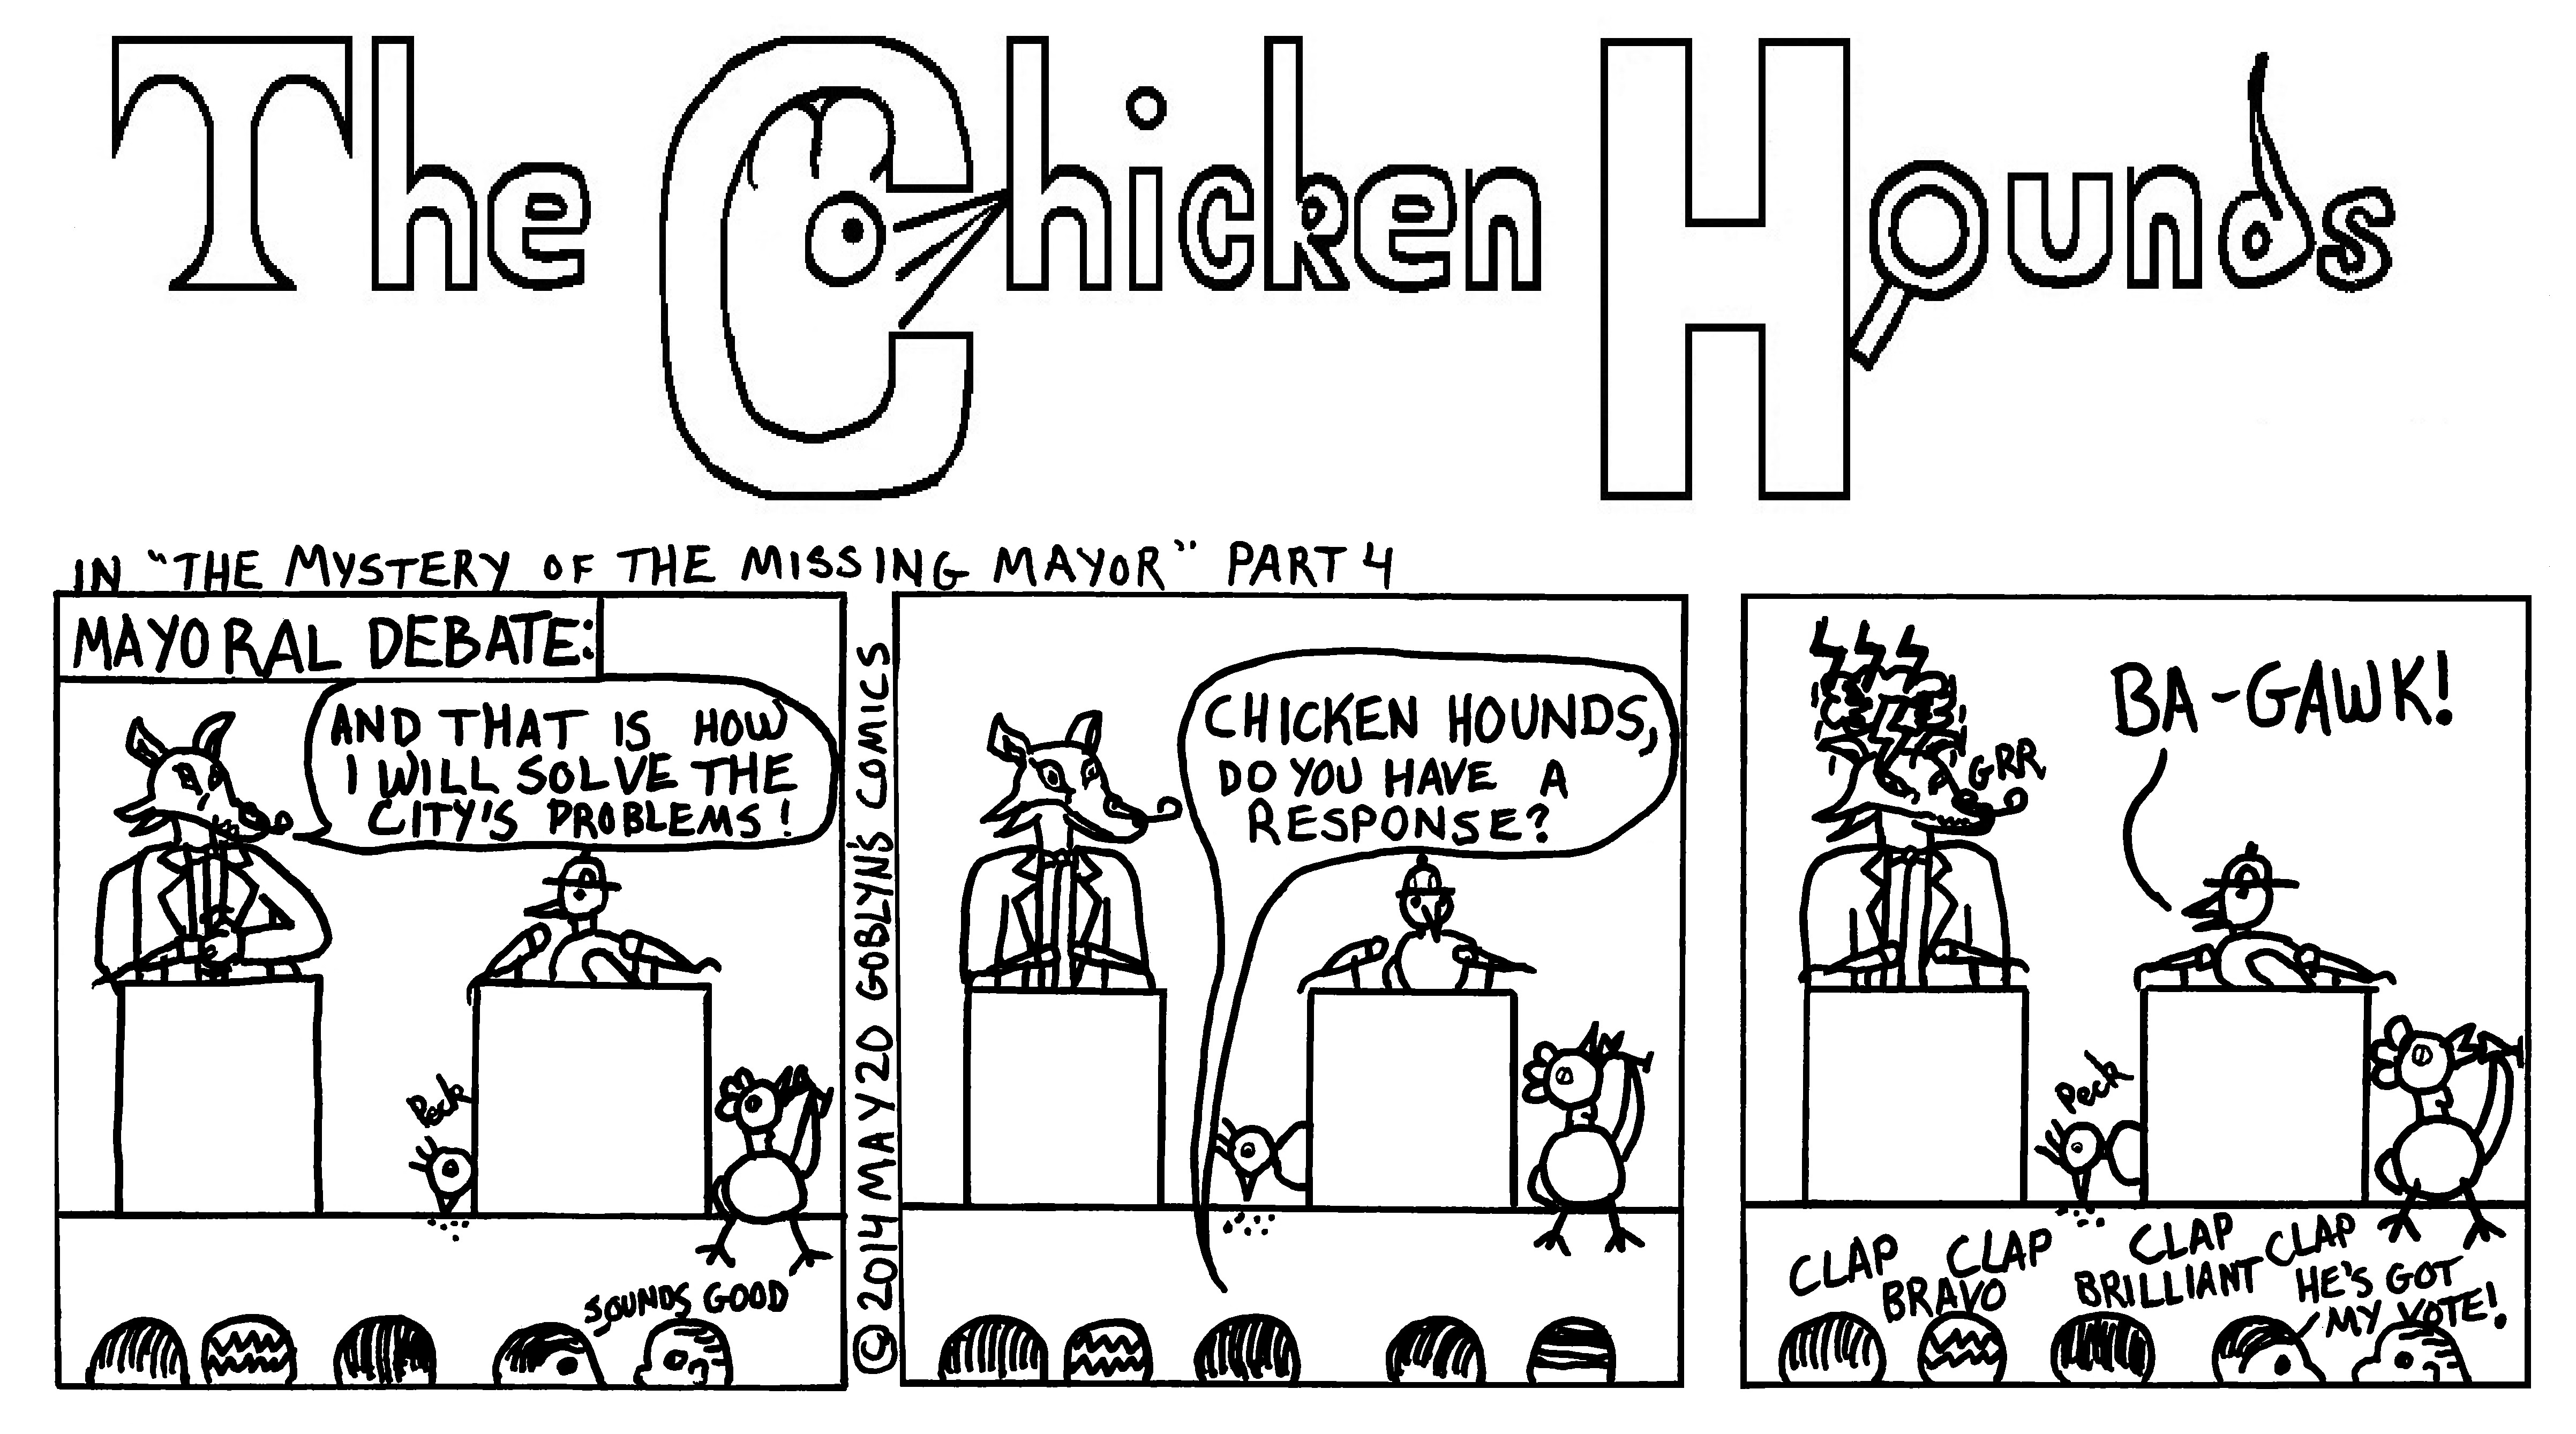 The Chicken Hounds in the Mystery of the Missing Mayor Part 4. Francisco Fox and the Chicken Hounds have a debate about their direction for San Francisco